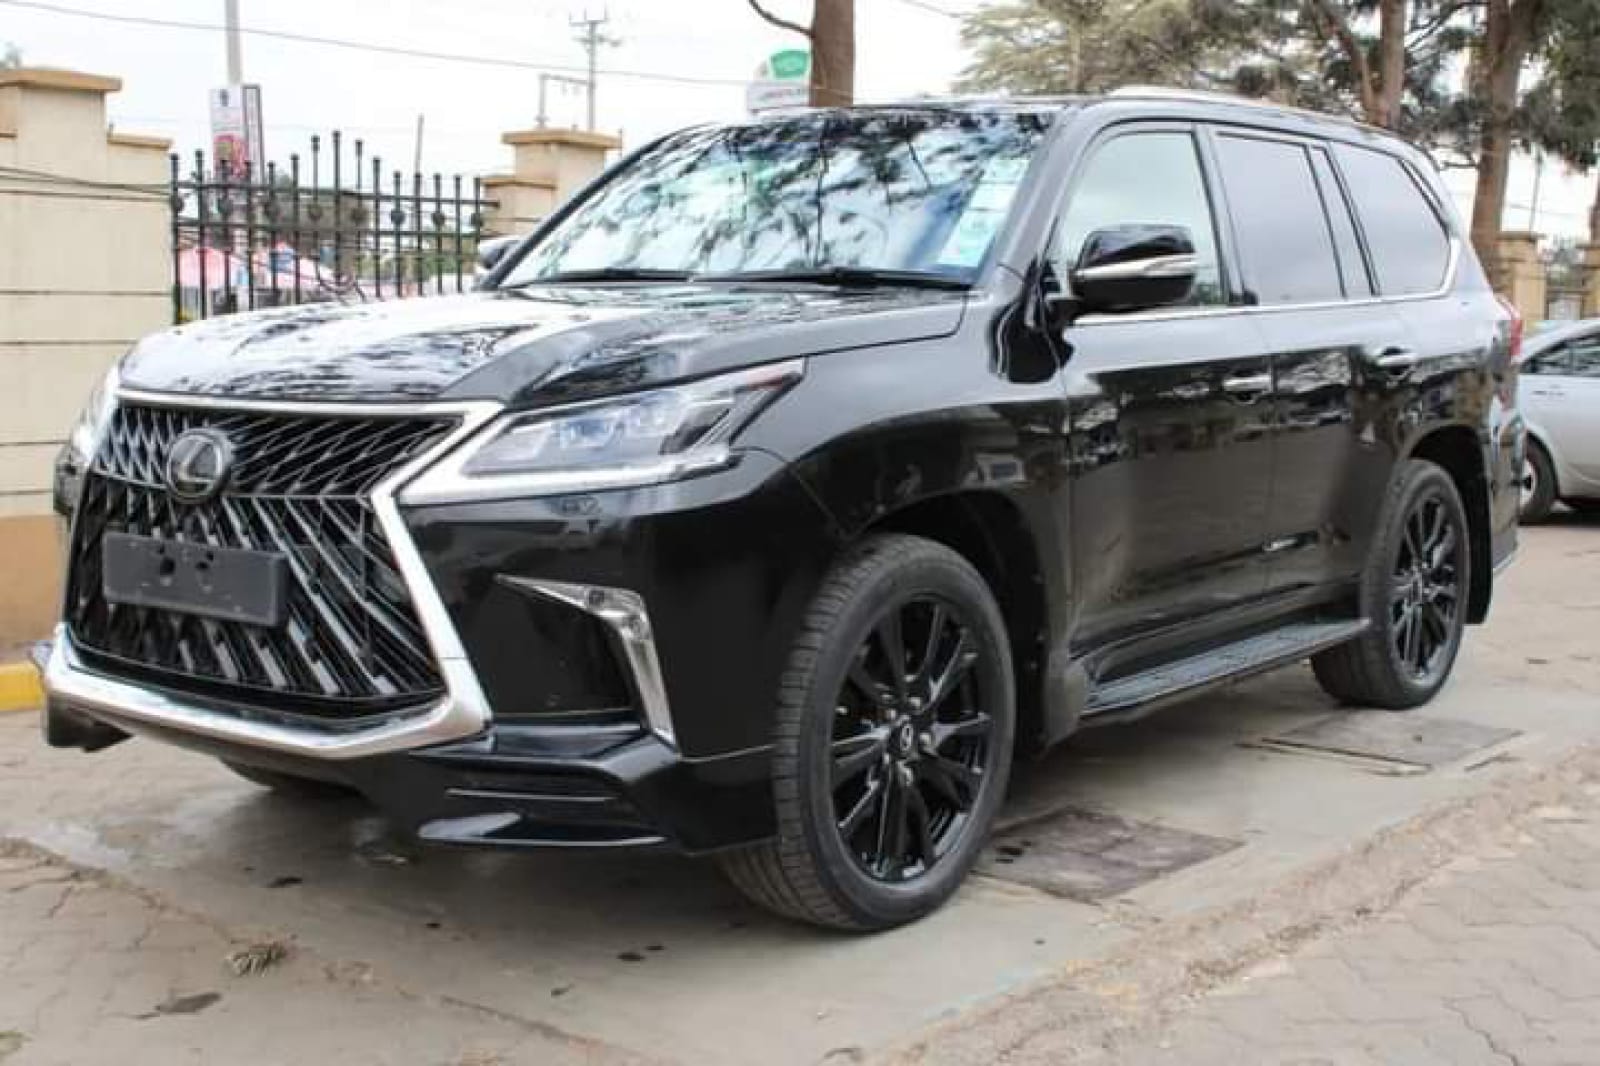 LEXUS LX 570 2019 Fully Loaded HIRE PURCHASE OK EXCLUSIVE For SALE in Kenya